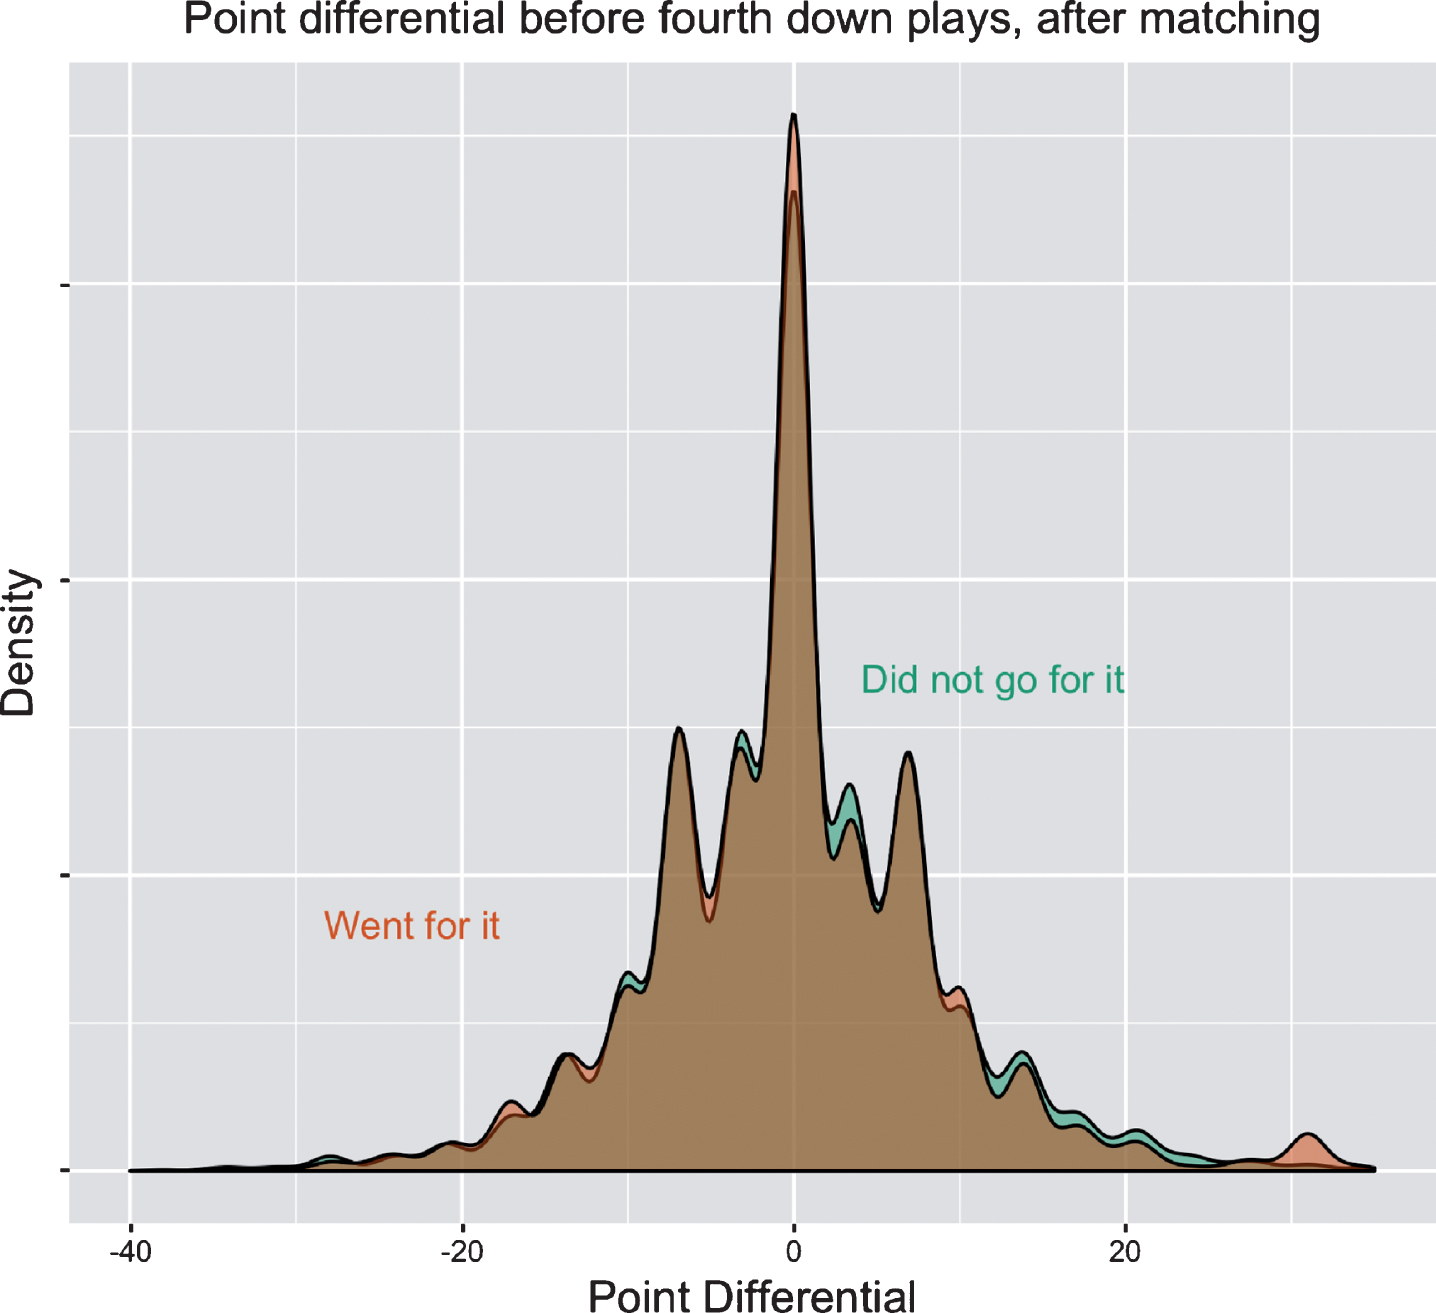 Density curves showing the distributions of point differential among teams that went for it on fourth down and teams that did not. Shown are all 4th-down plays from the 2004 through 2016 seasons included in our matched analysis (7,698 pairs of plays).